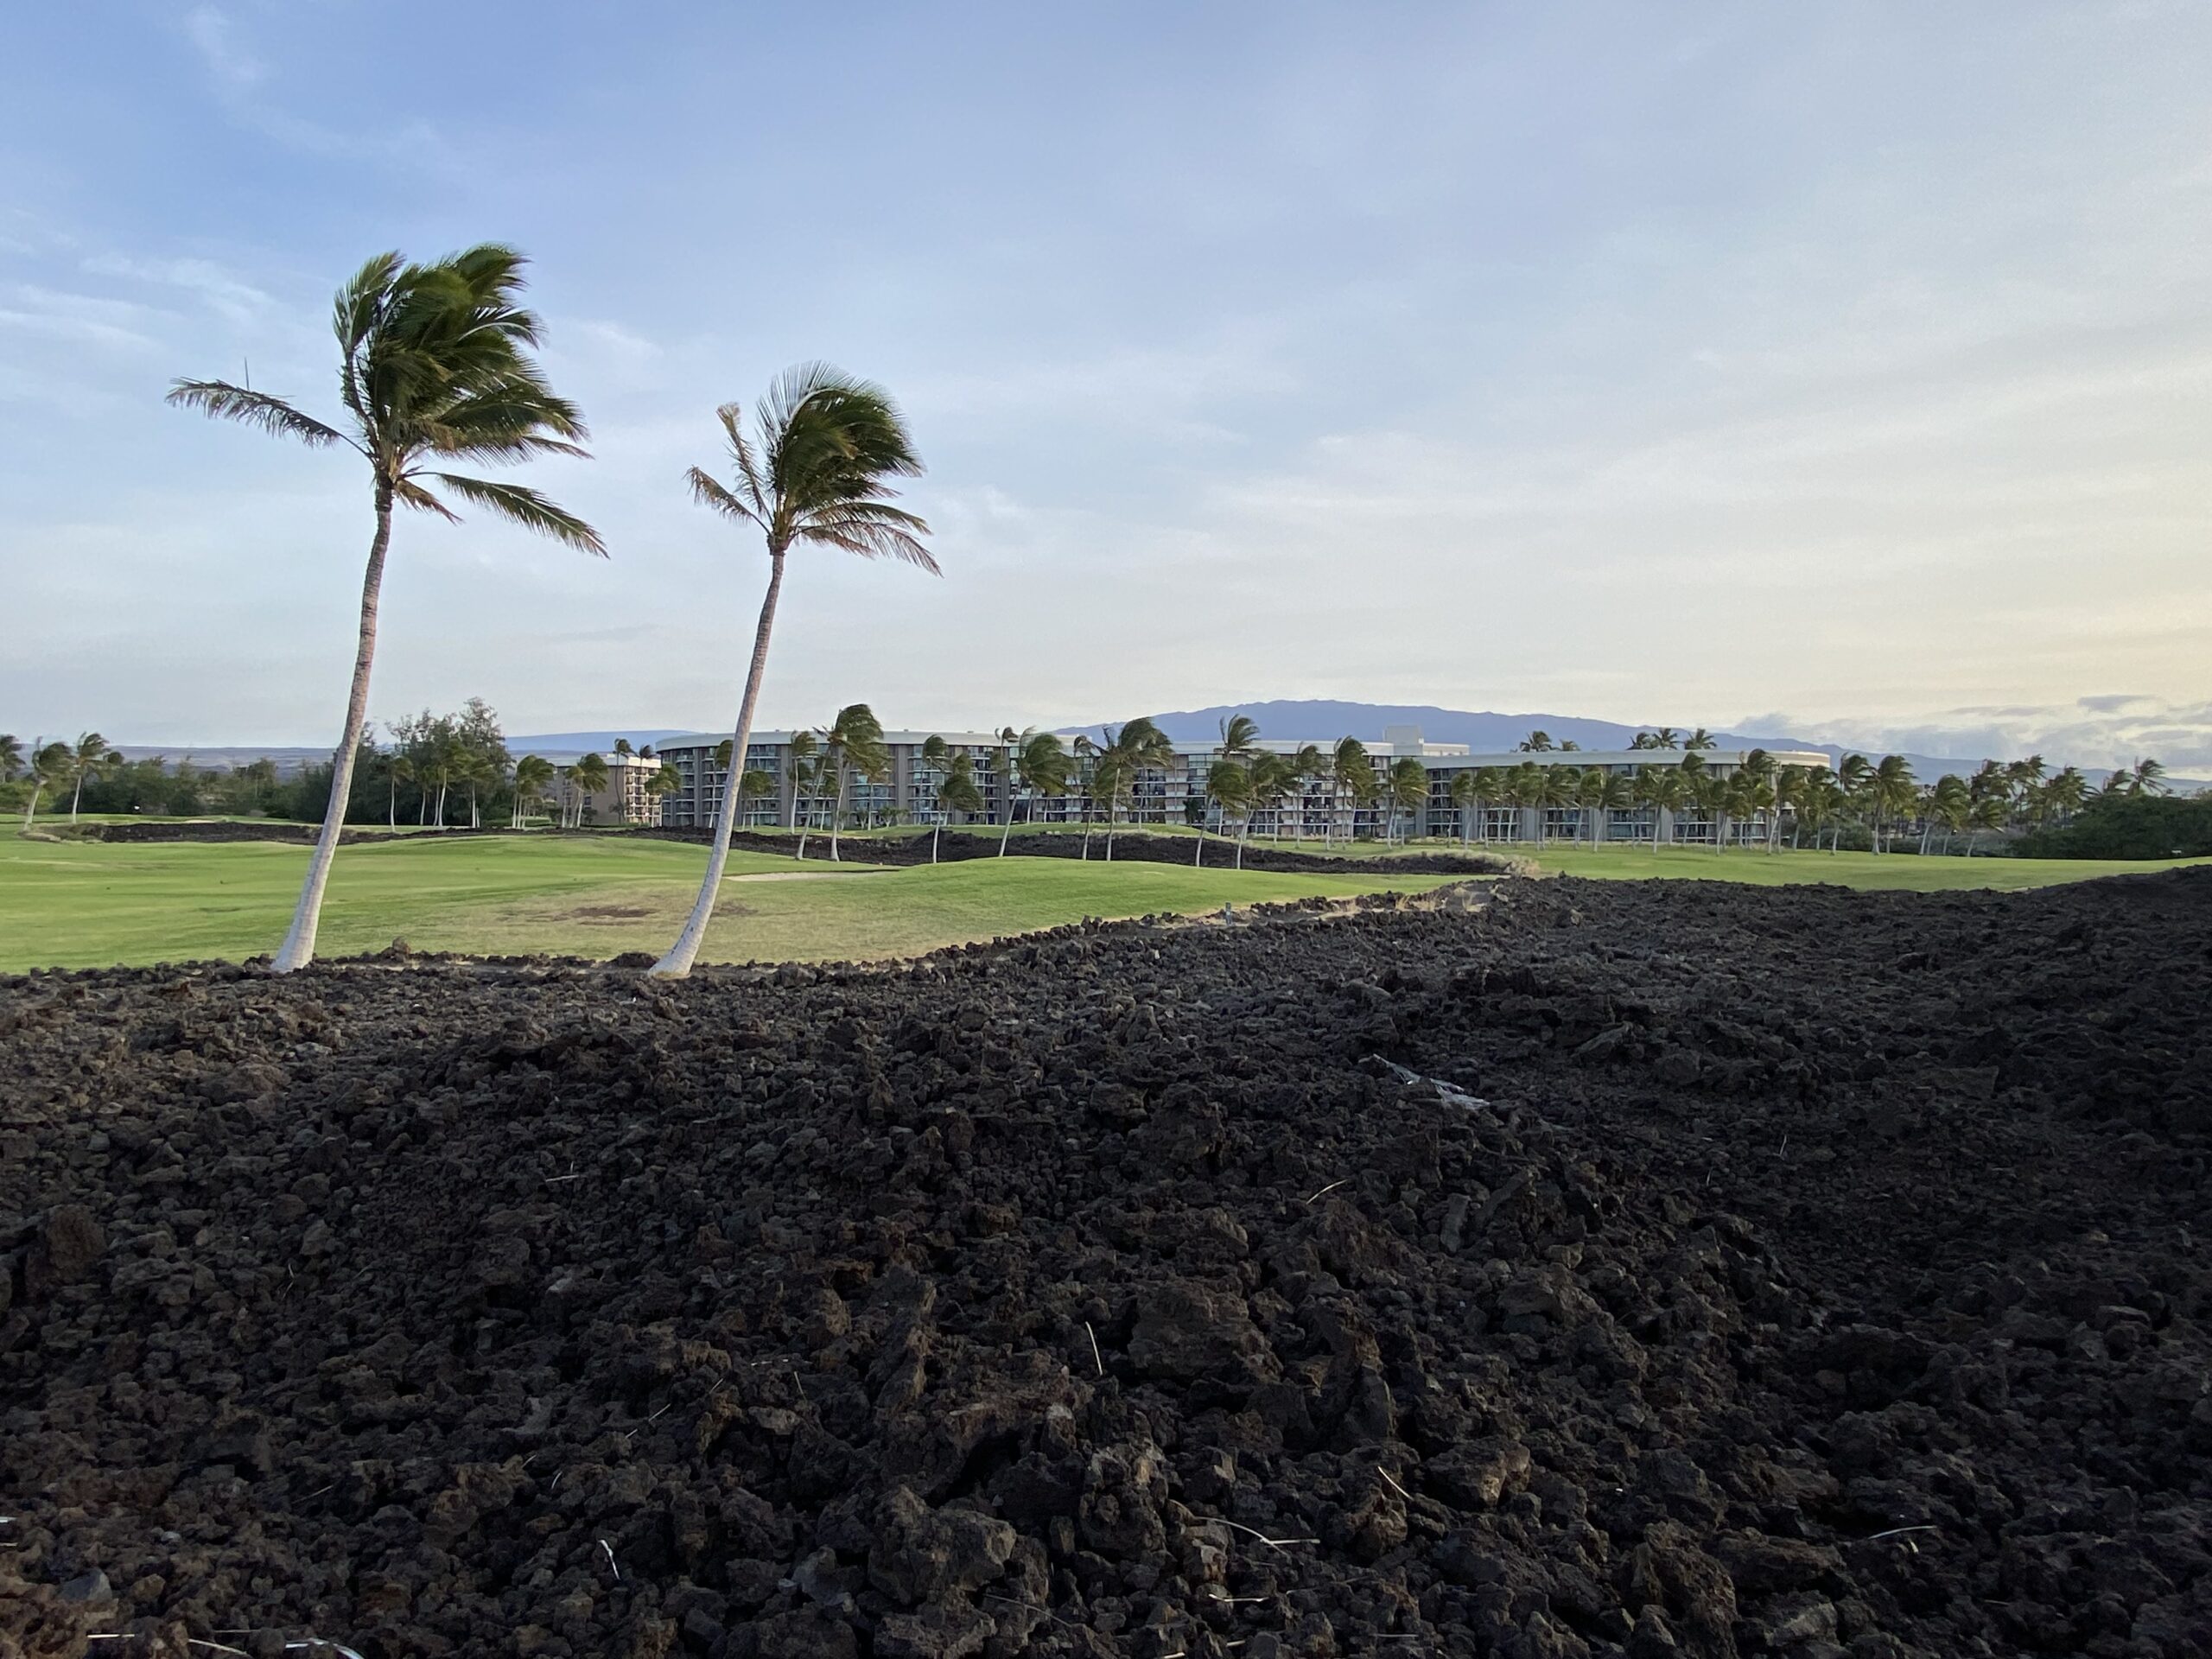 a dirt field with palm trees